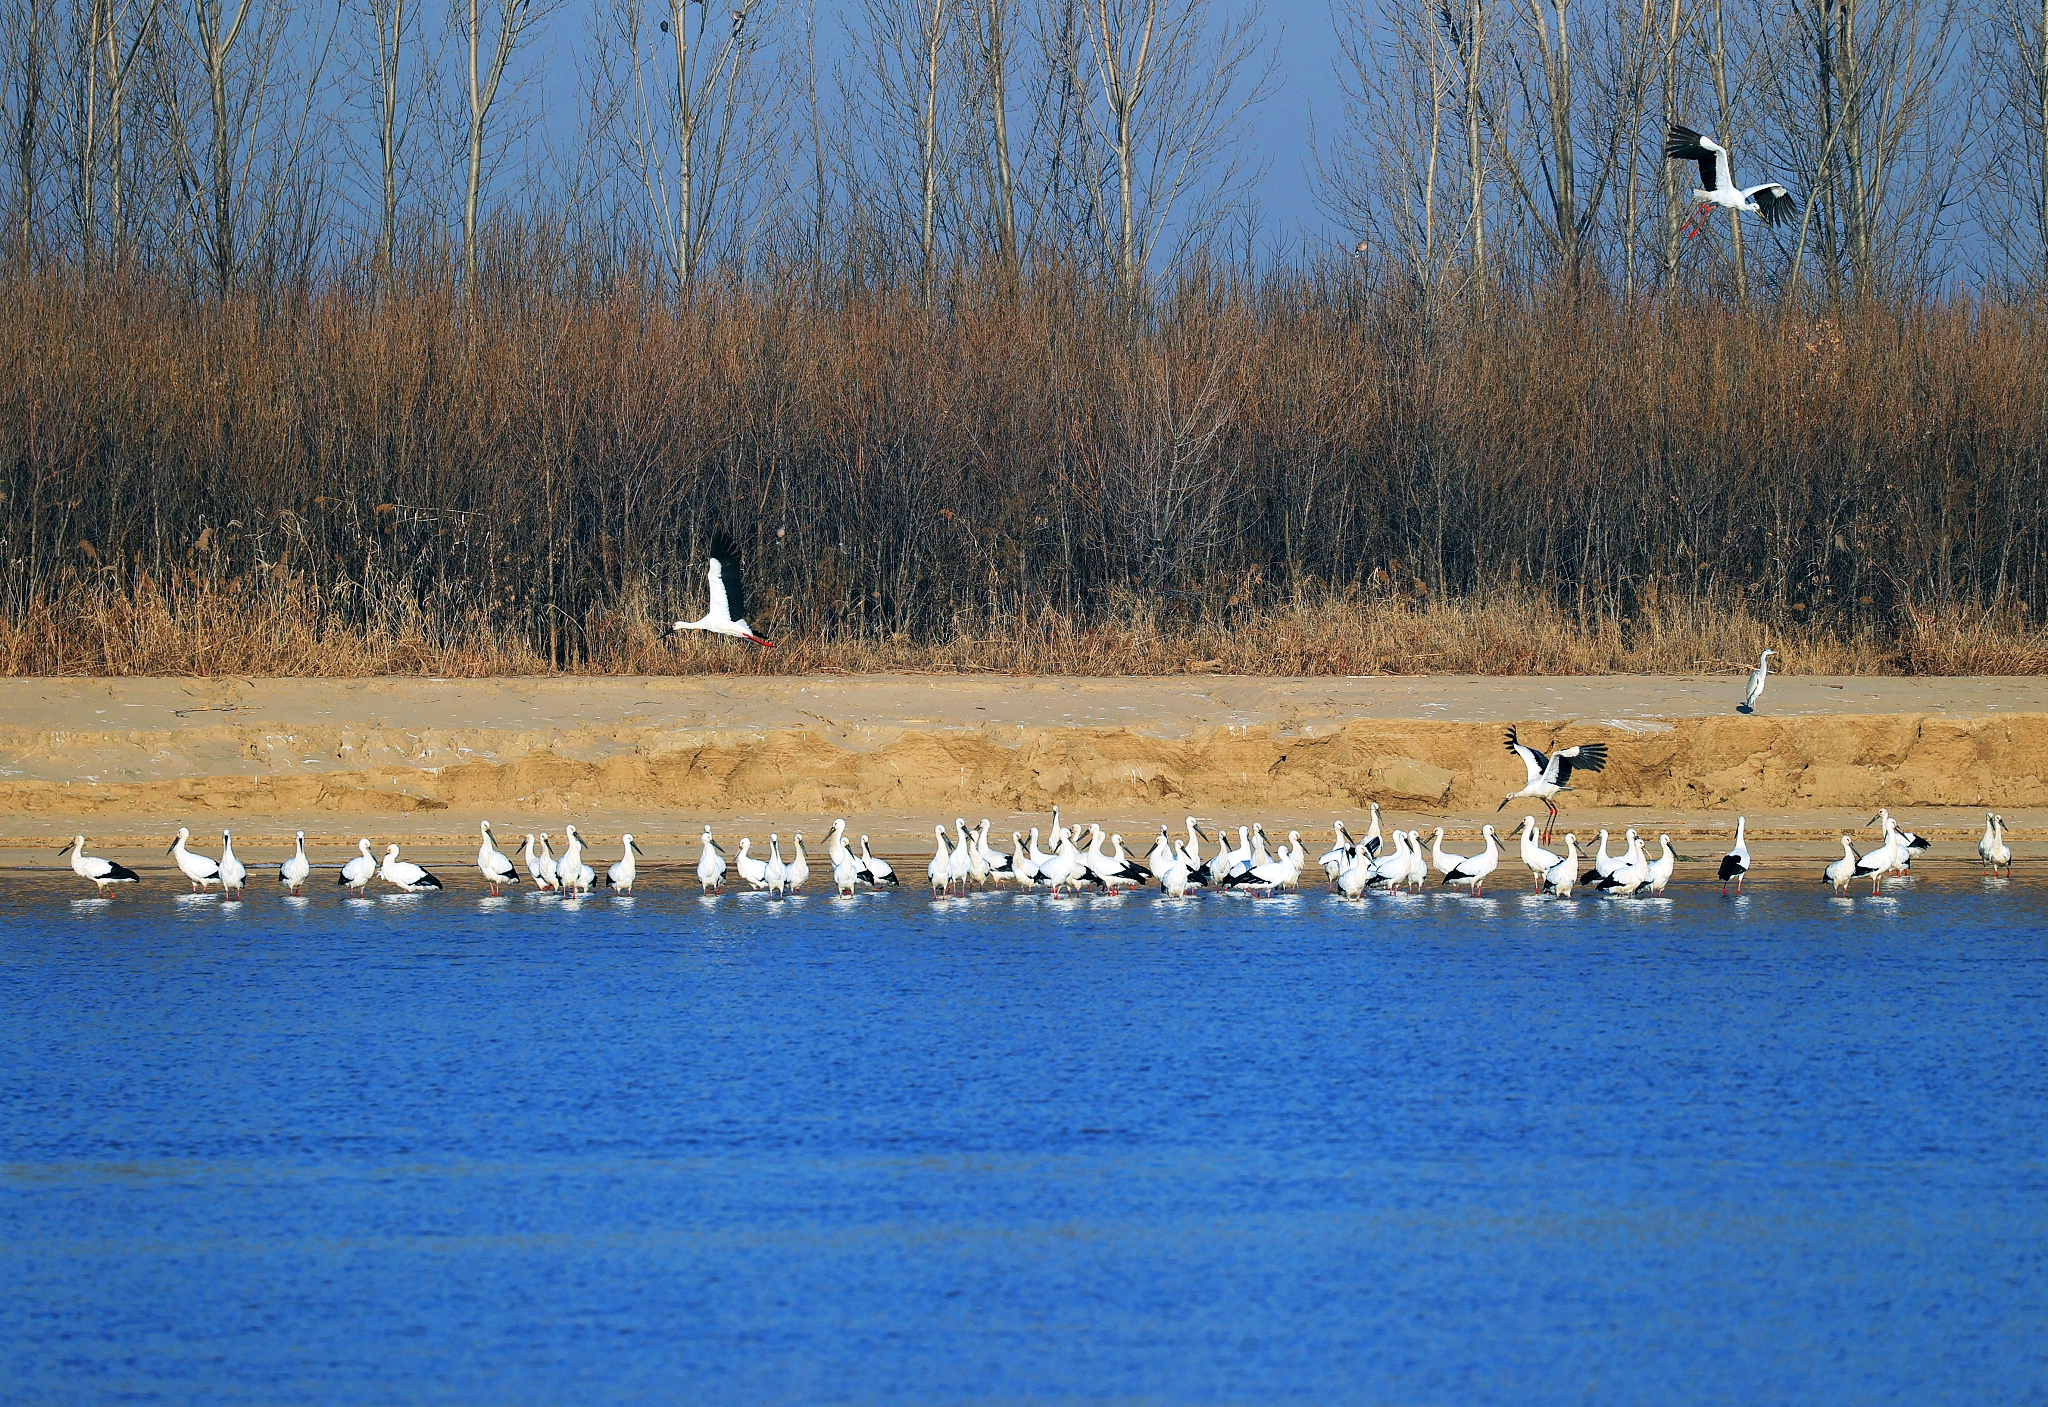 A file photo shows migratory birds in a sanctuary at the mouth of the Yellow River in Dongying, Shandong Province. /CFP